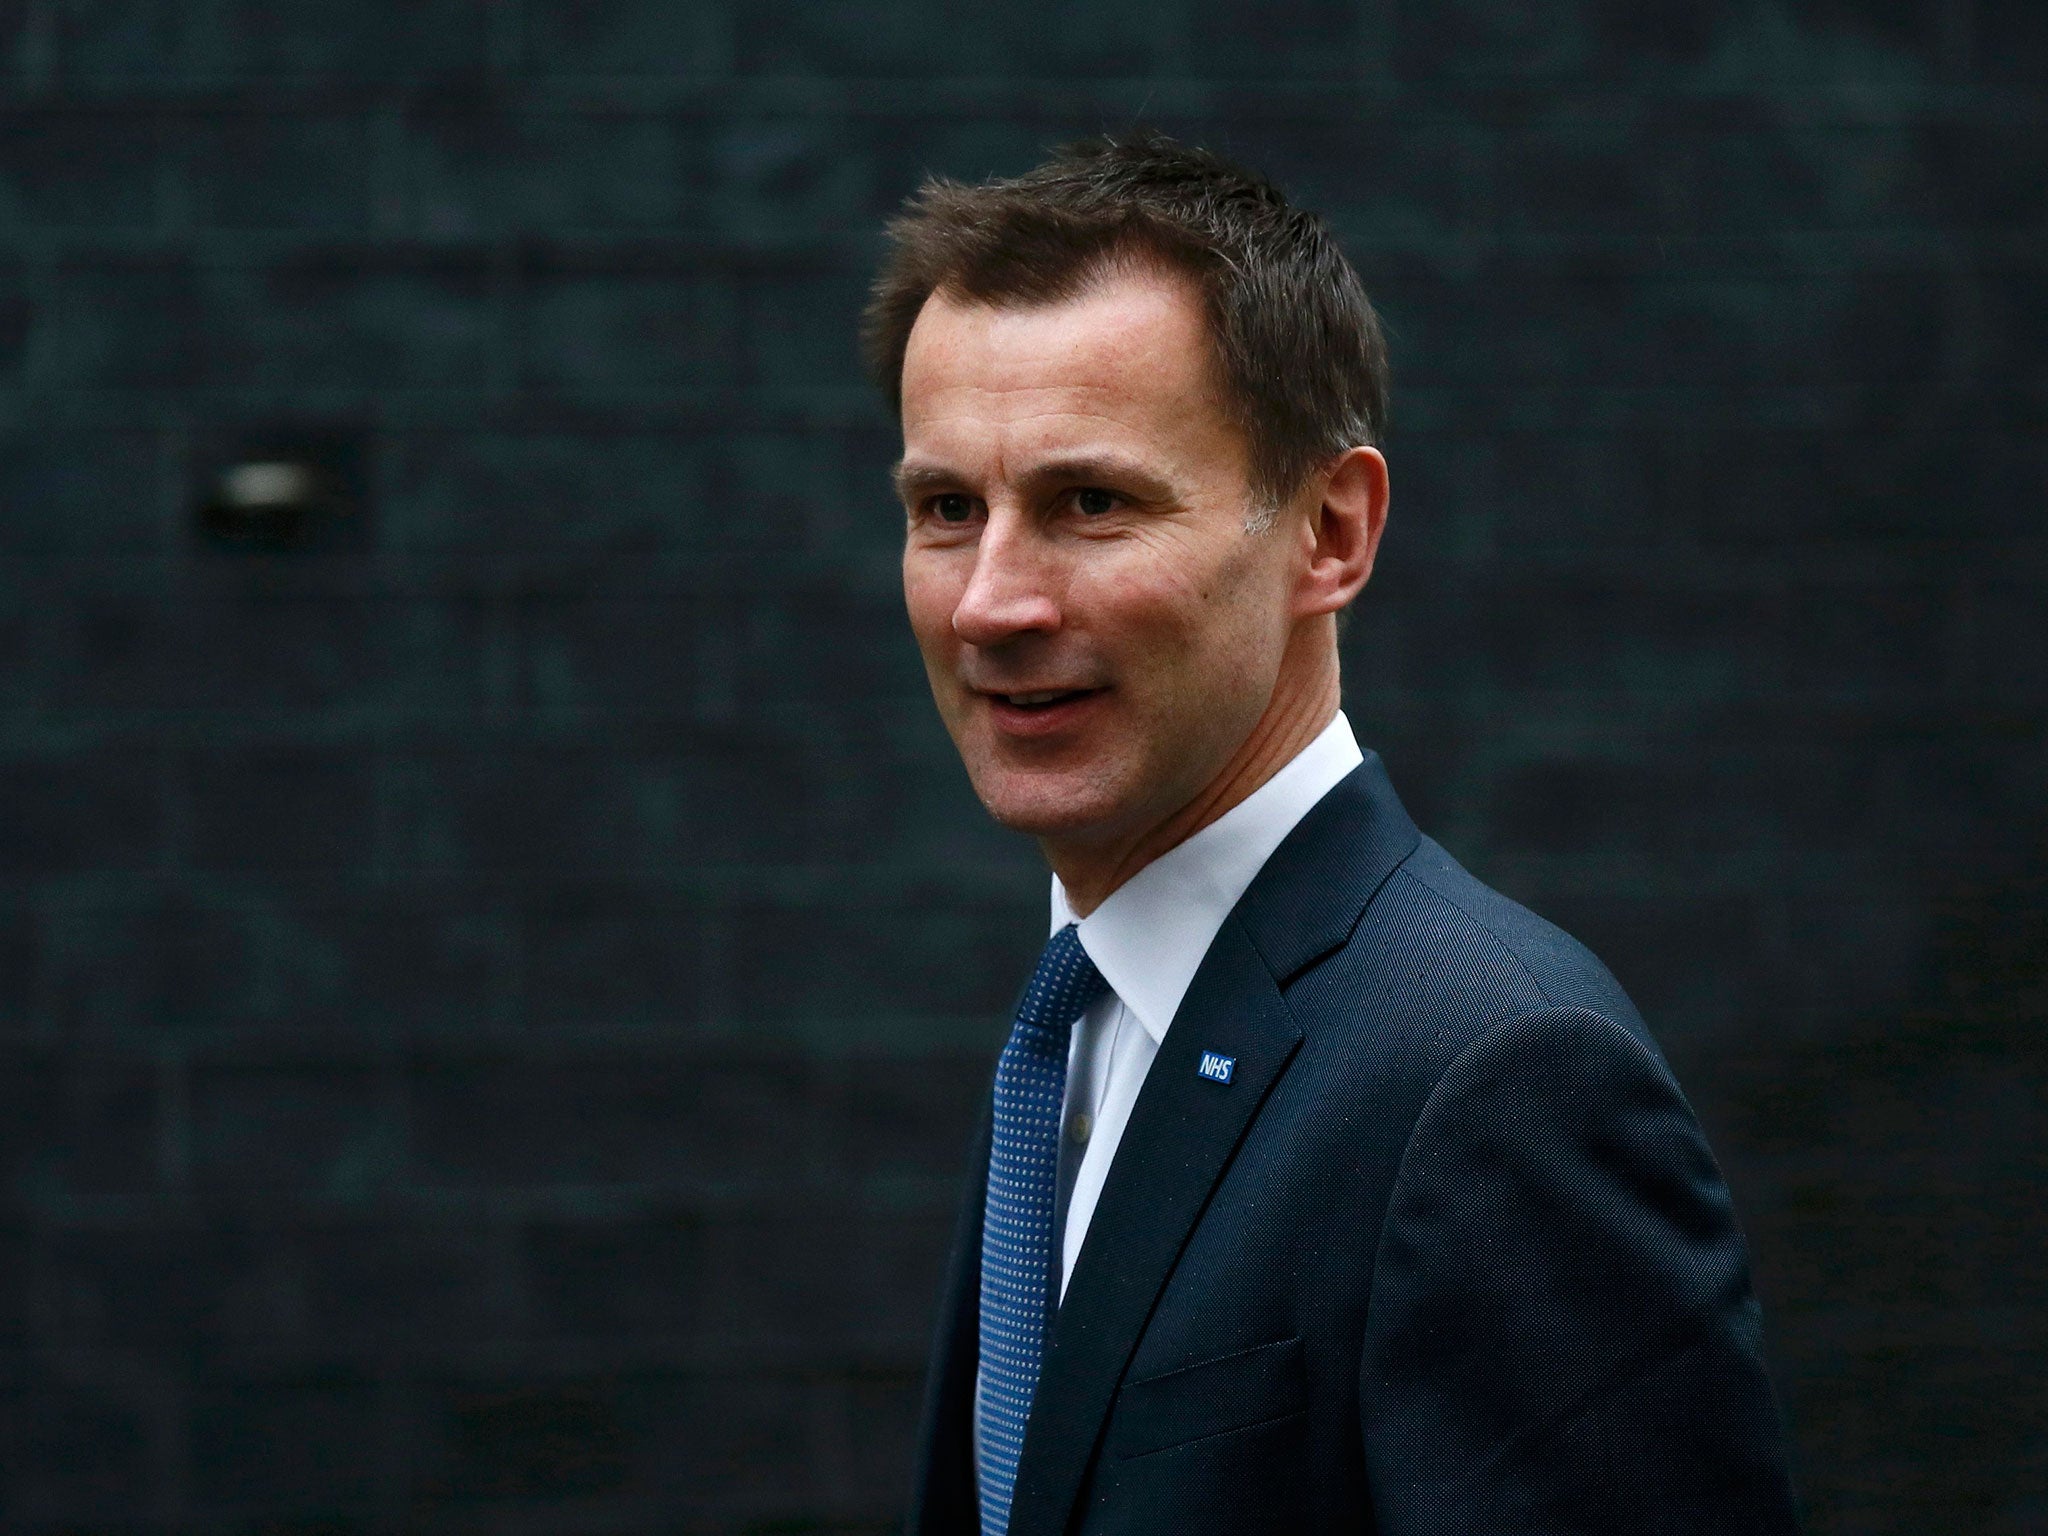 Health Secretary Jeremy Hunt has been criticised by doctors